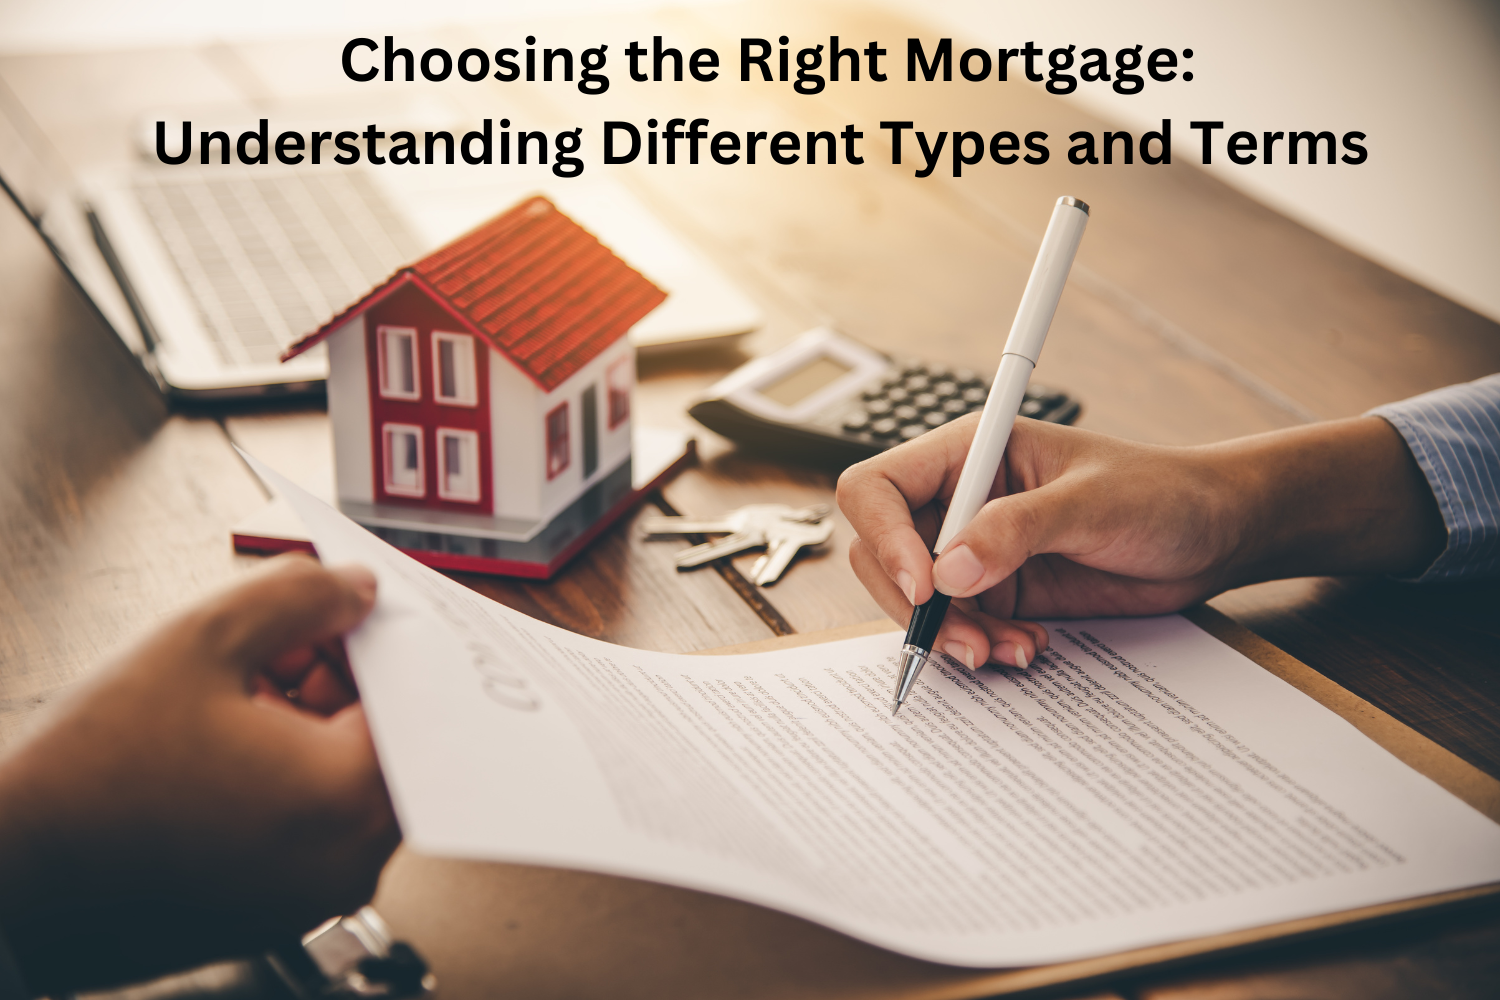 Choosing the Right Mortgage: Understanding Different Types and Terms